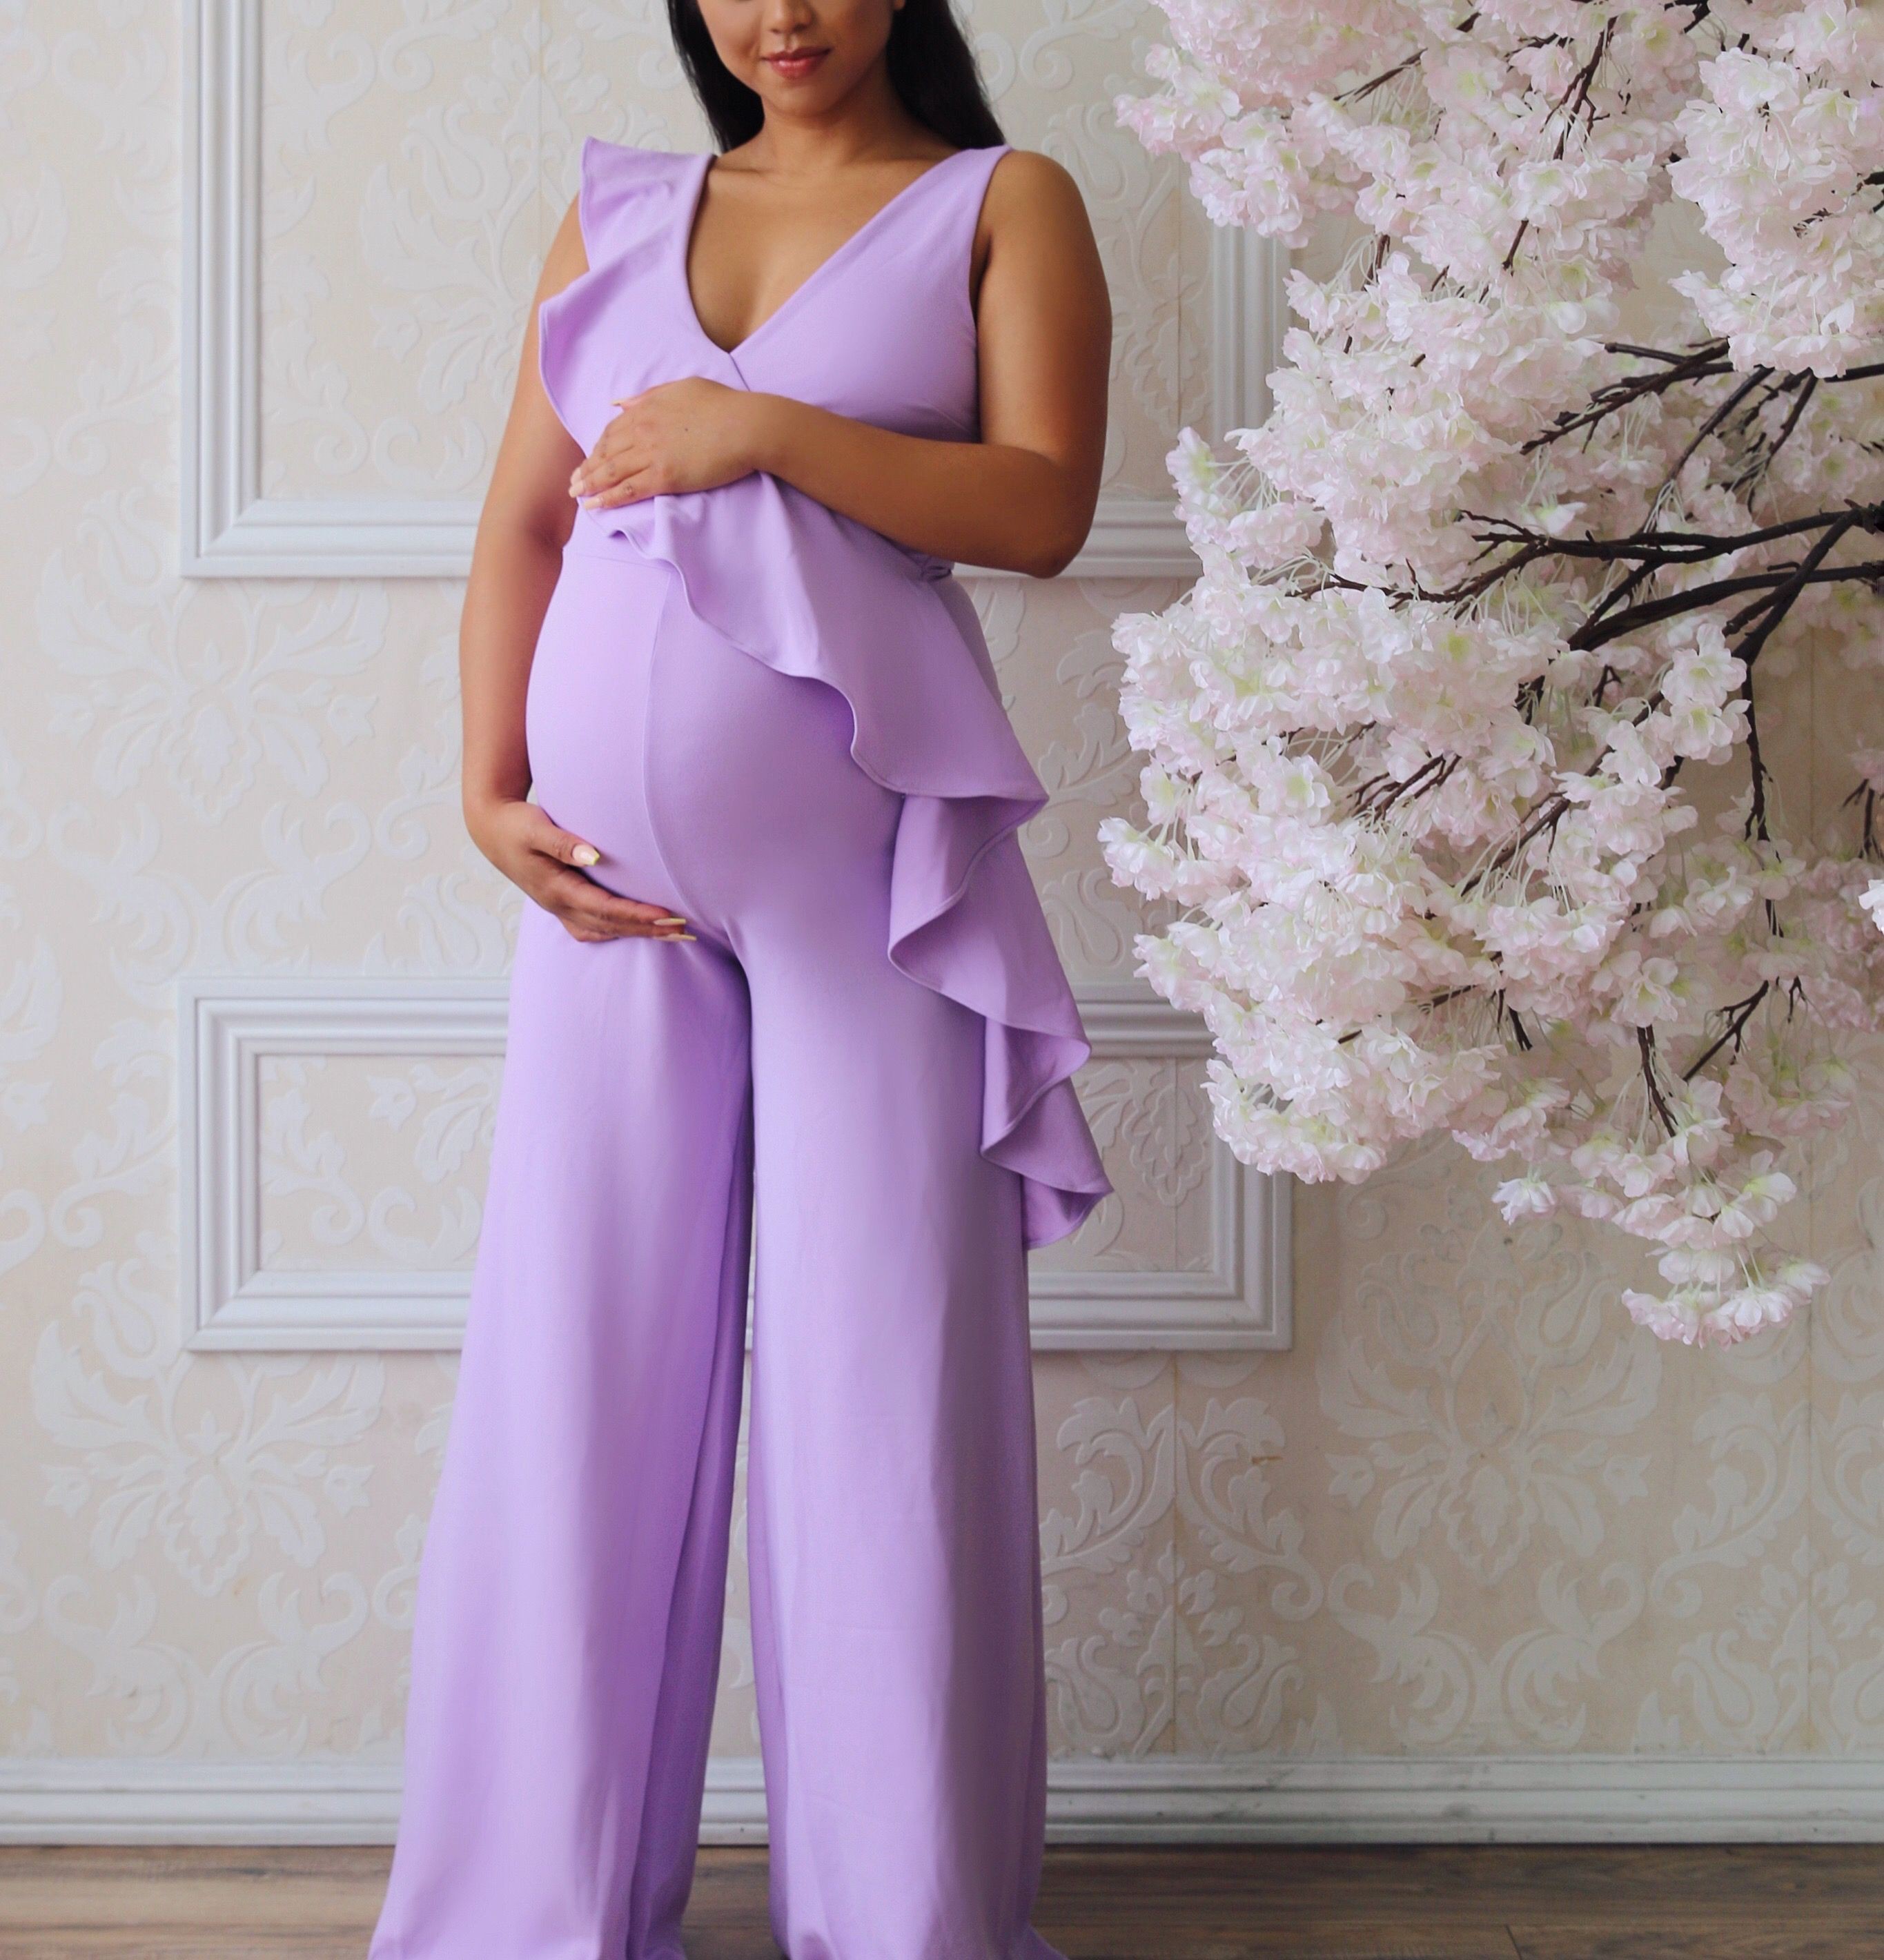 Outfit Ideas For Pregnant Ladies Maternity Outfits Gender Reveal Party Maternity Clothing 